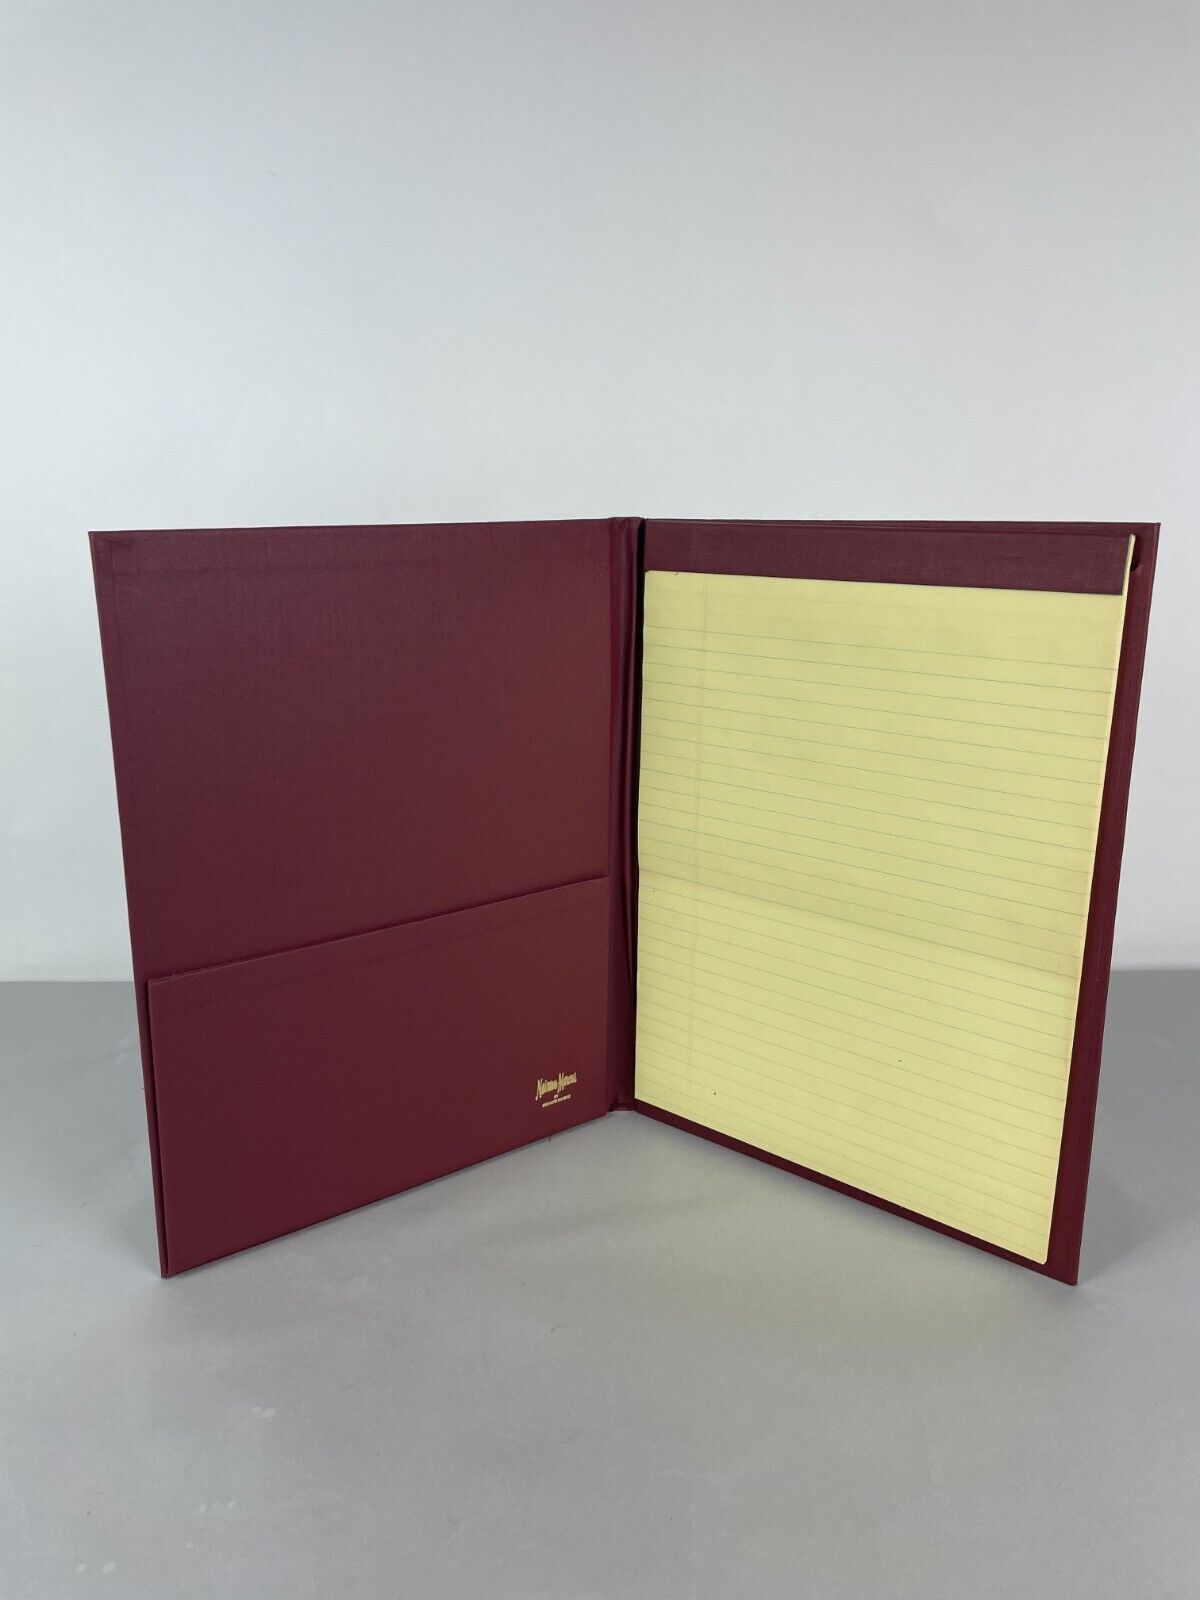 NEW Vintage 1990's NEIMAN MARCUS Private Papers Stationary Folder Notebook